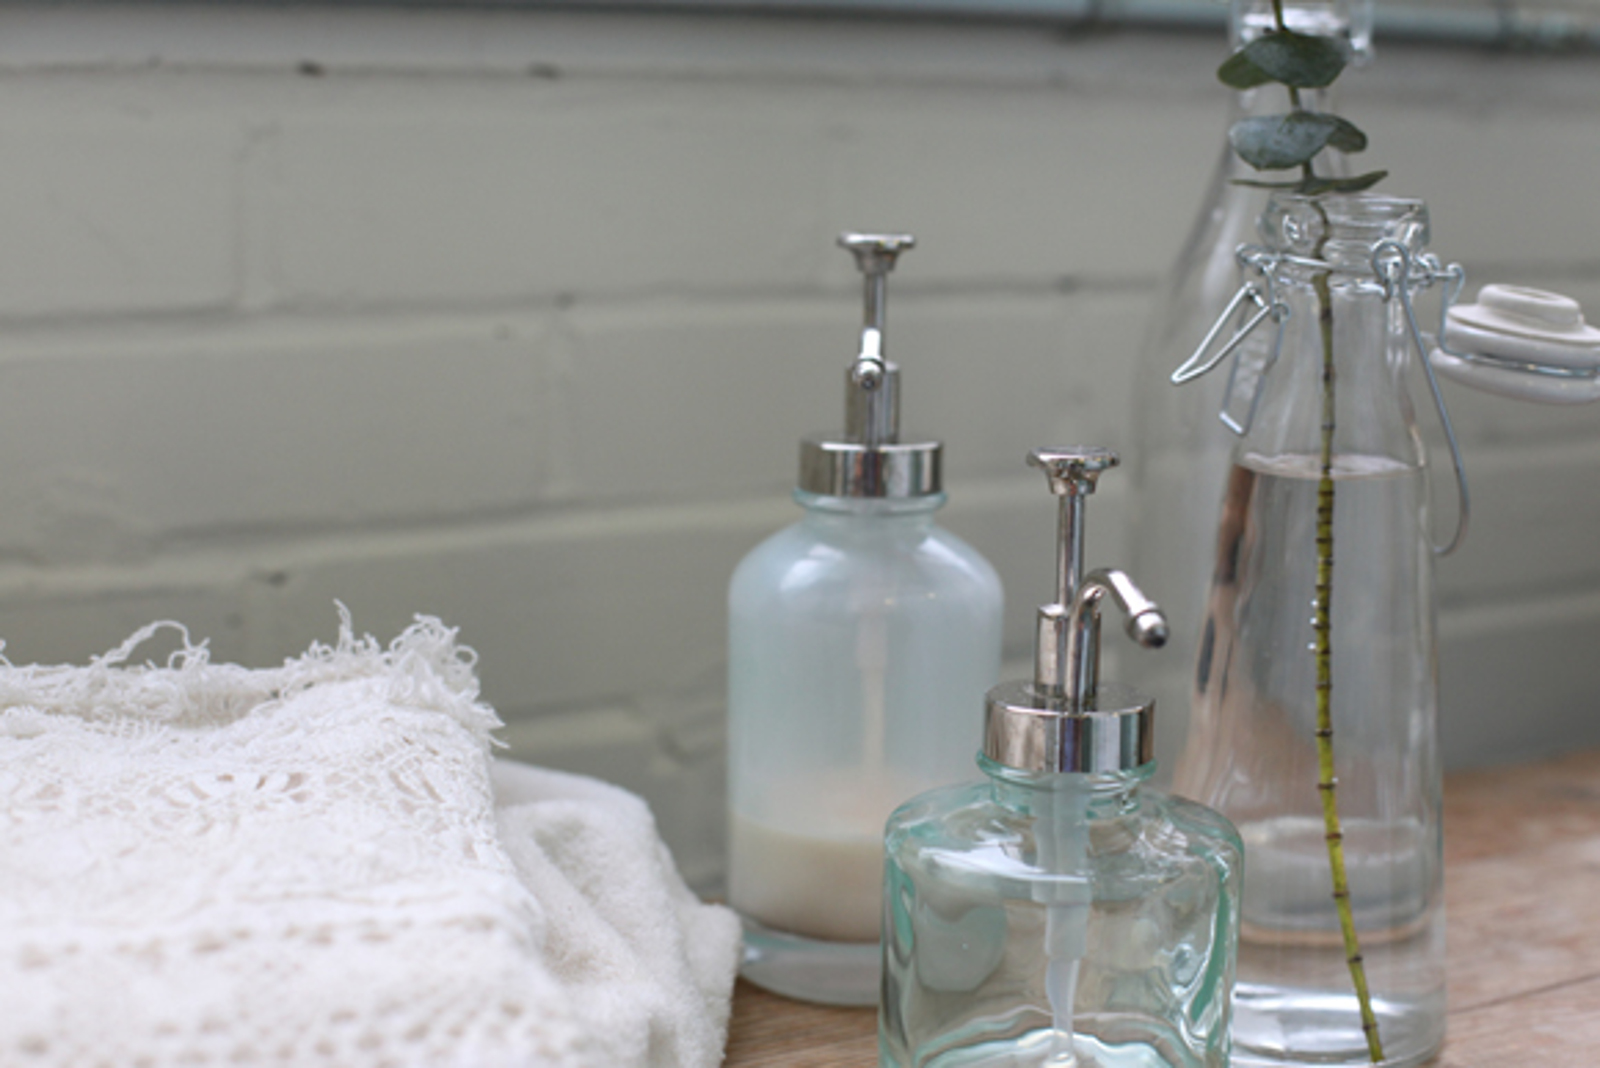 Simple Steps for a Waste-Free Beauty Routine